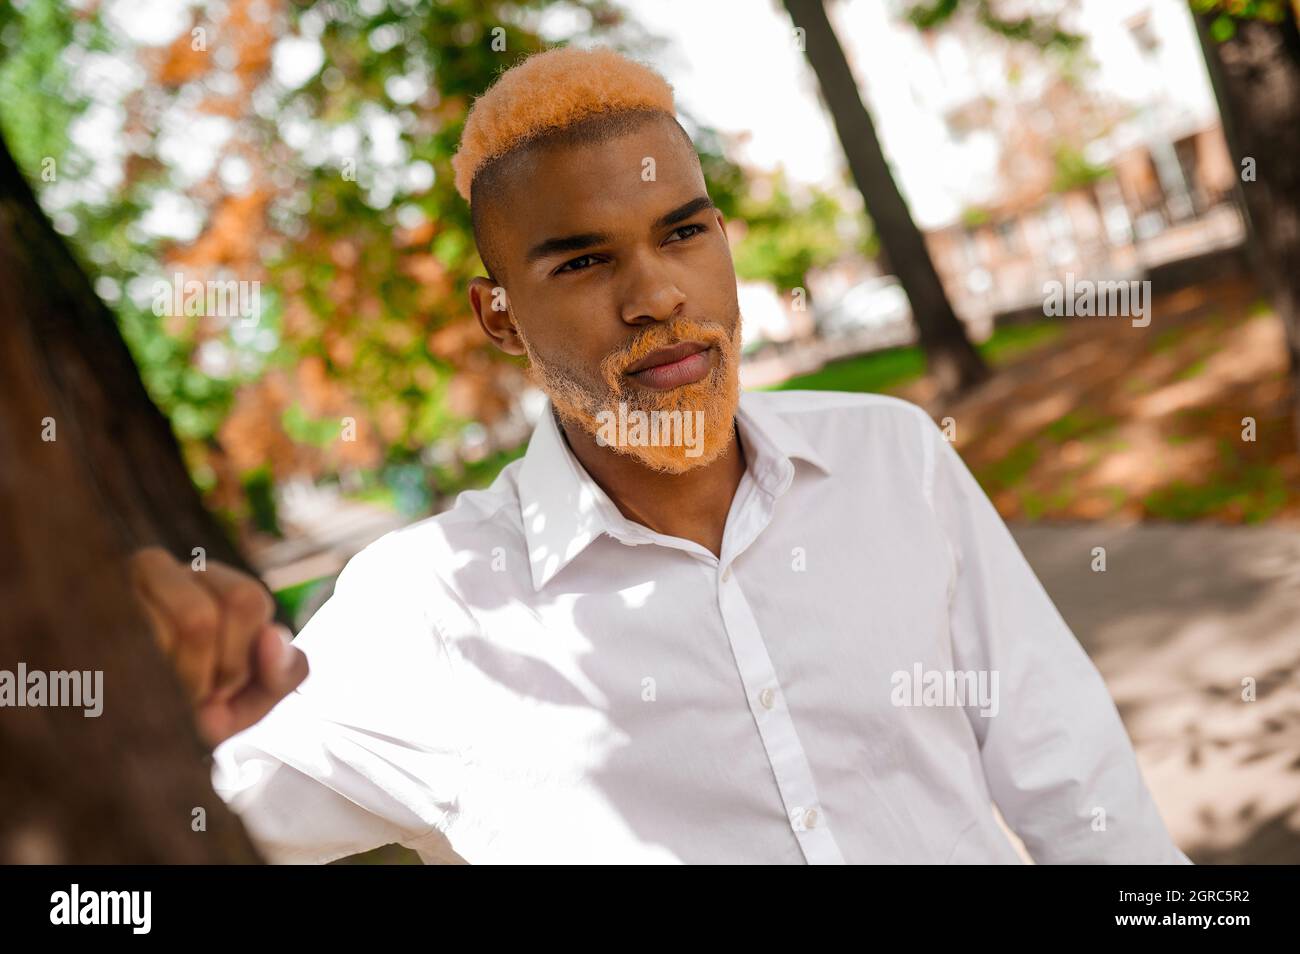 A man in white clothes in the park looking serious Stock Photo